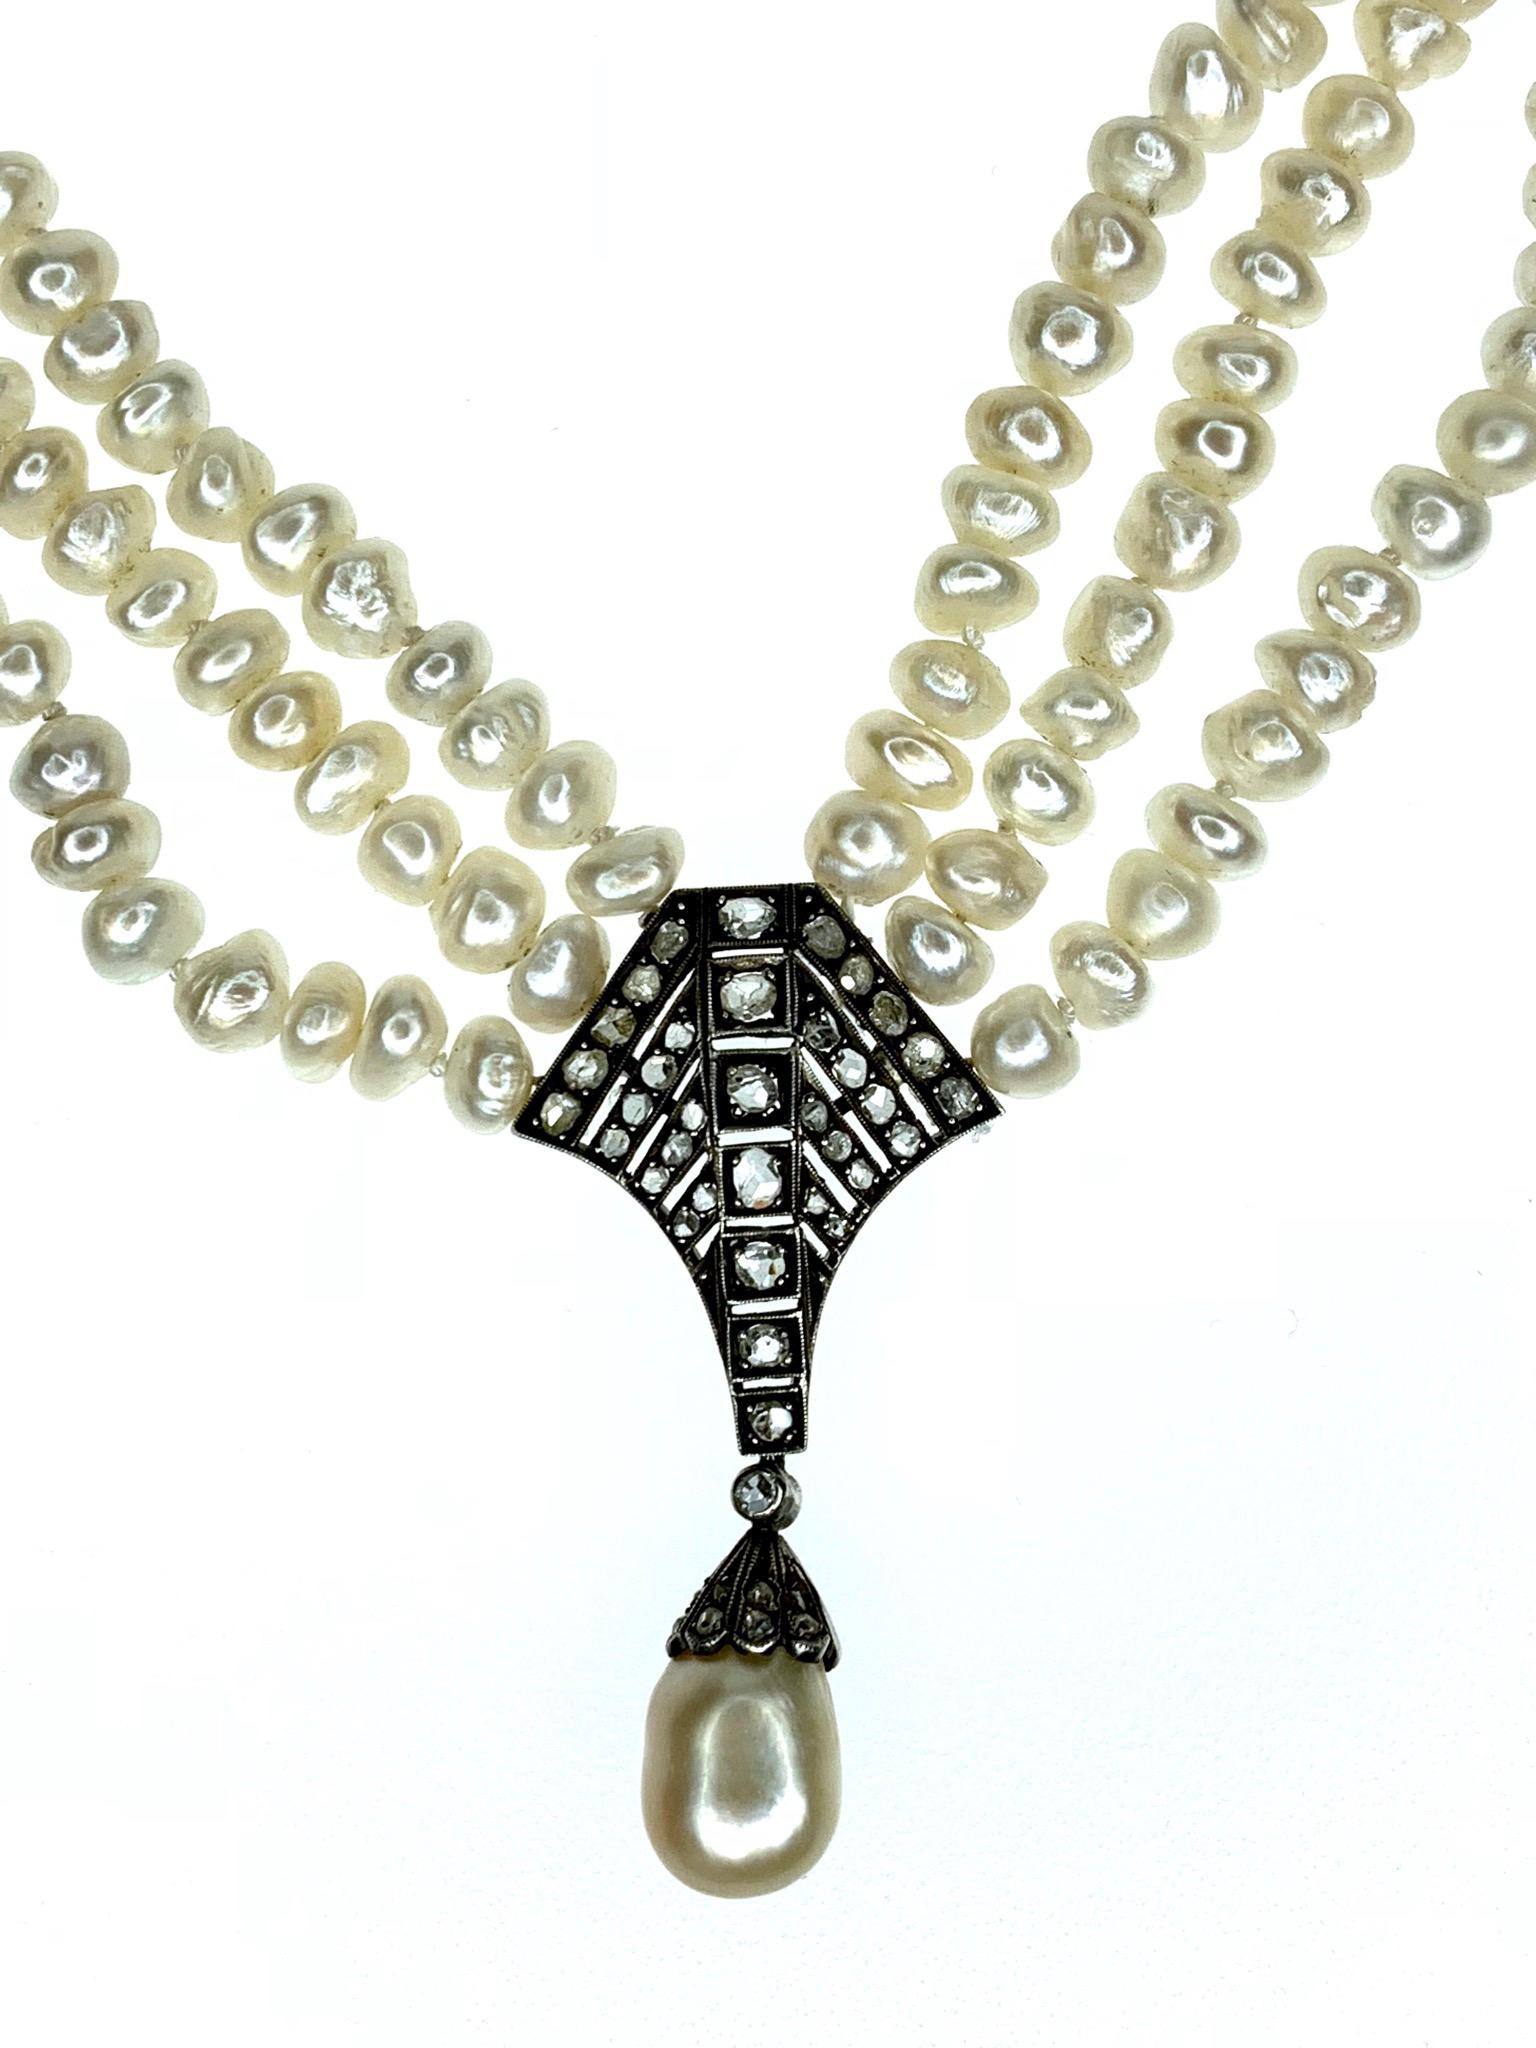 GEMOLITHOS Antique Natural Pearl & Diamond Necklace 19th Century. Bashra pearls Certified all natural 